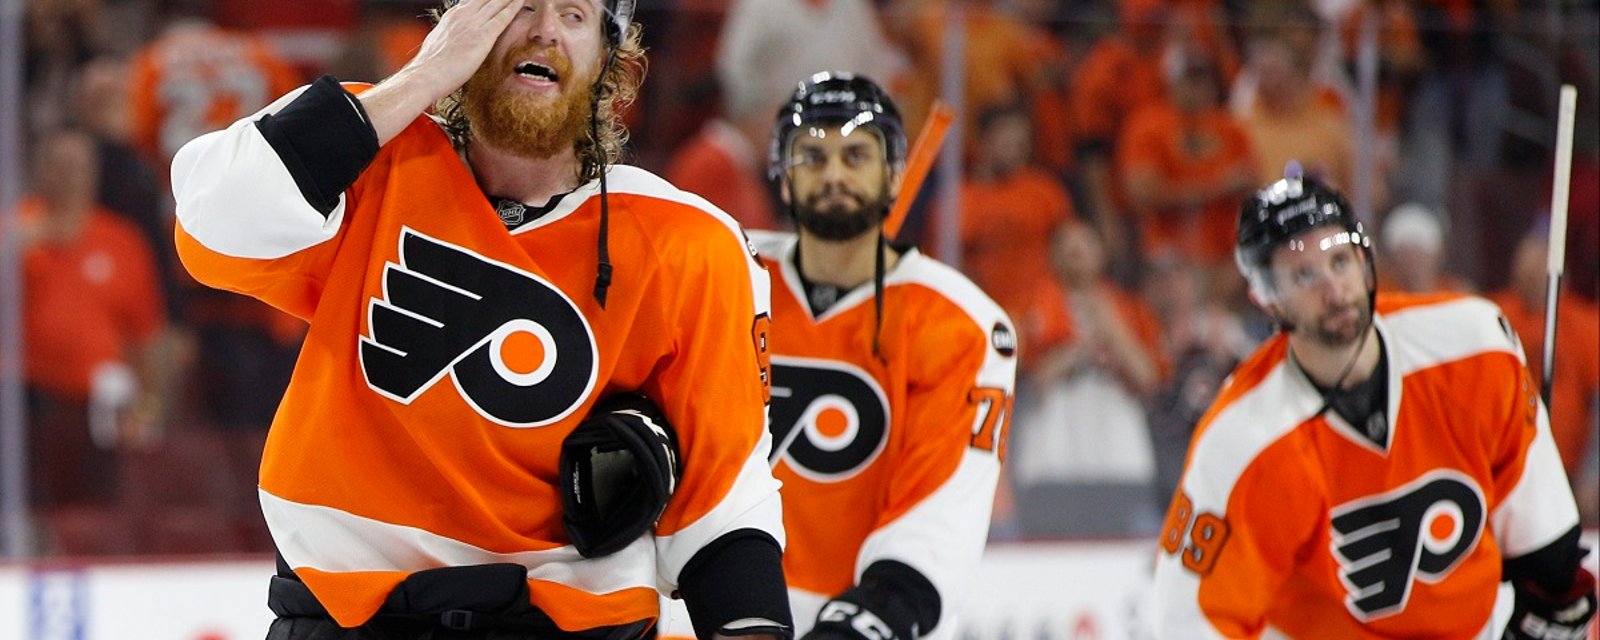 Flyers players and management whine about the cheering from their fans.